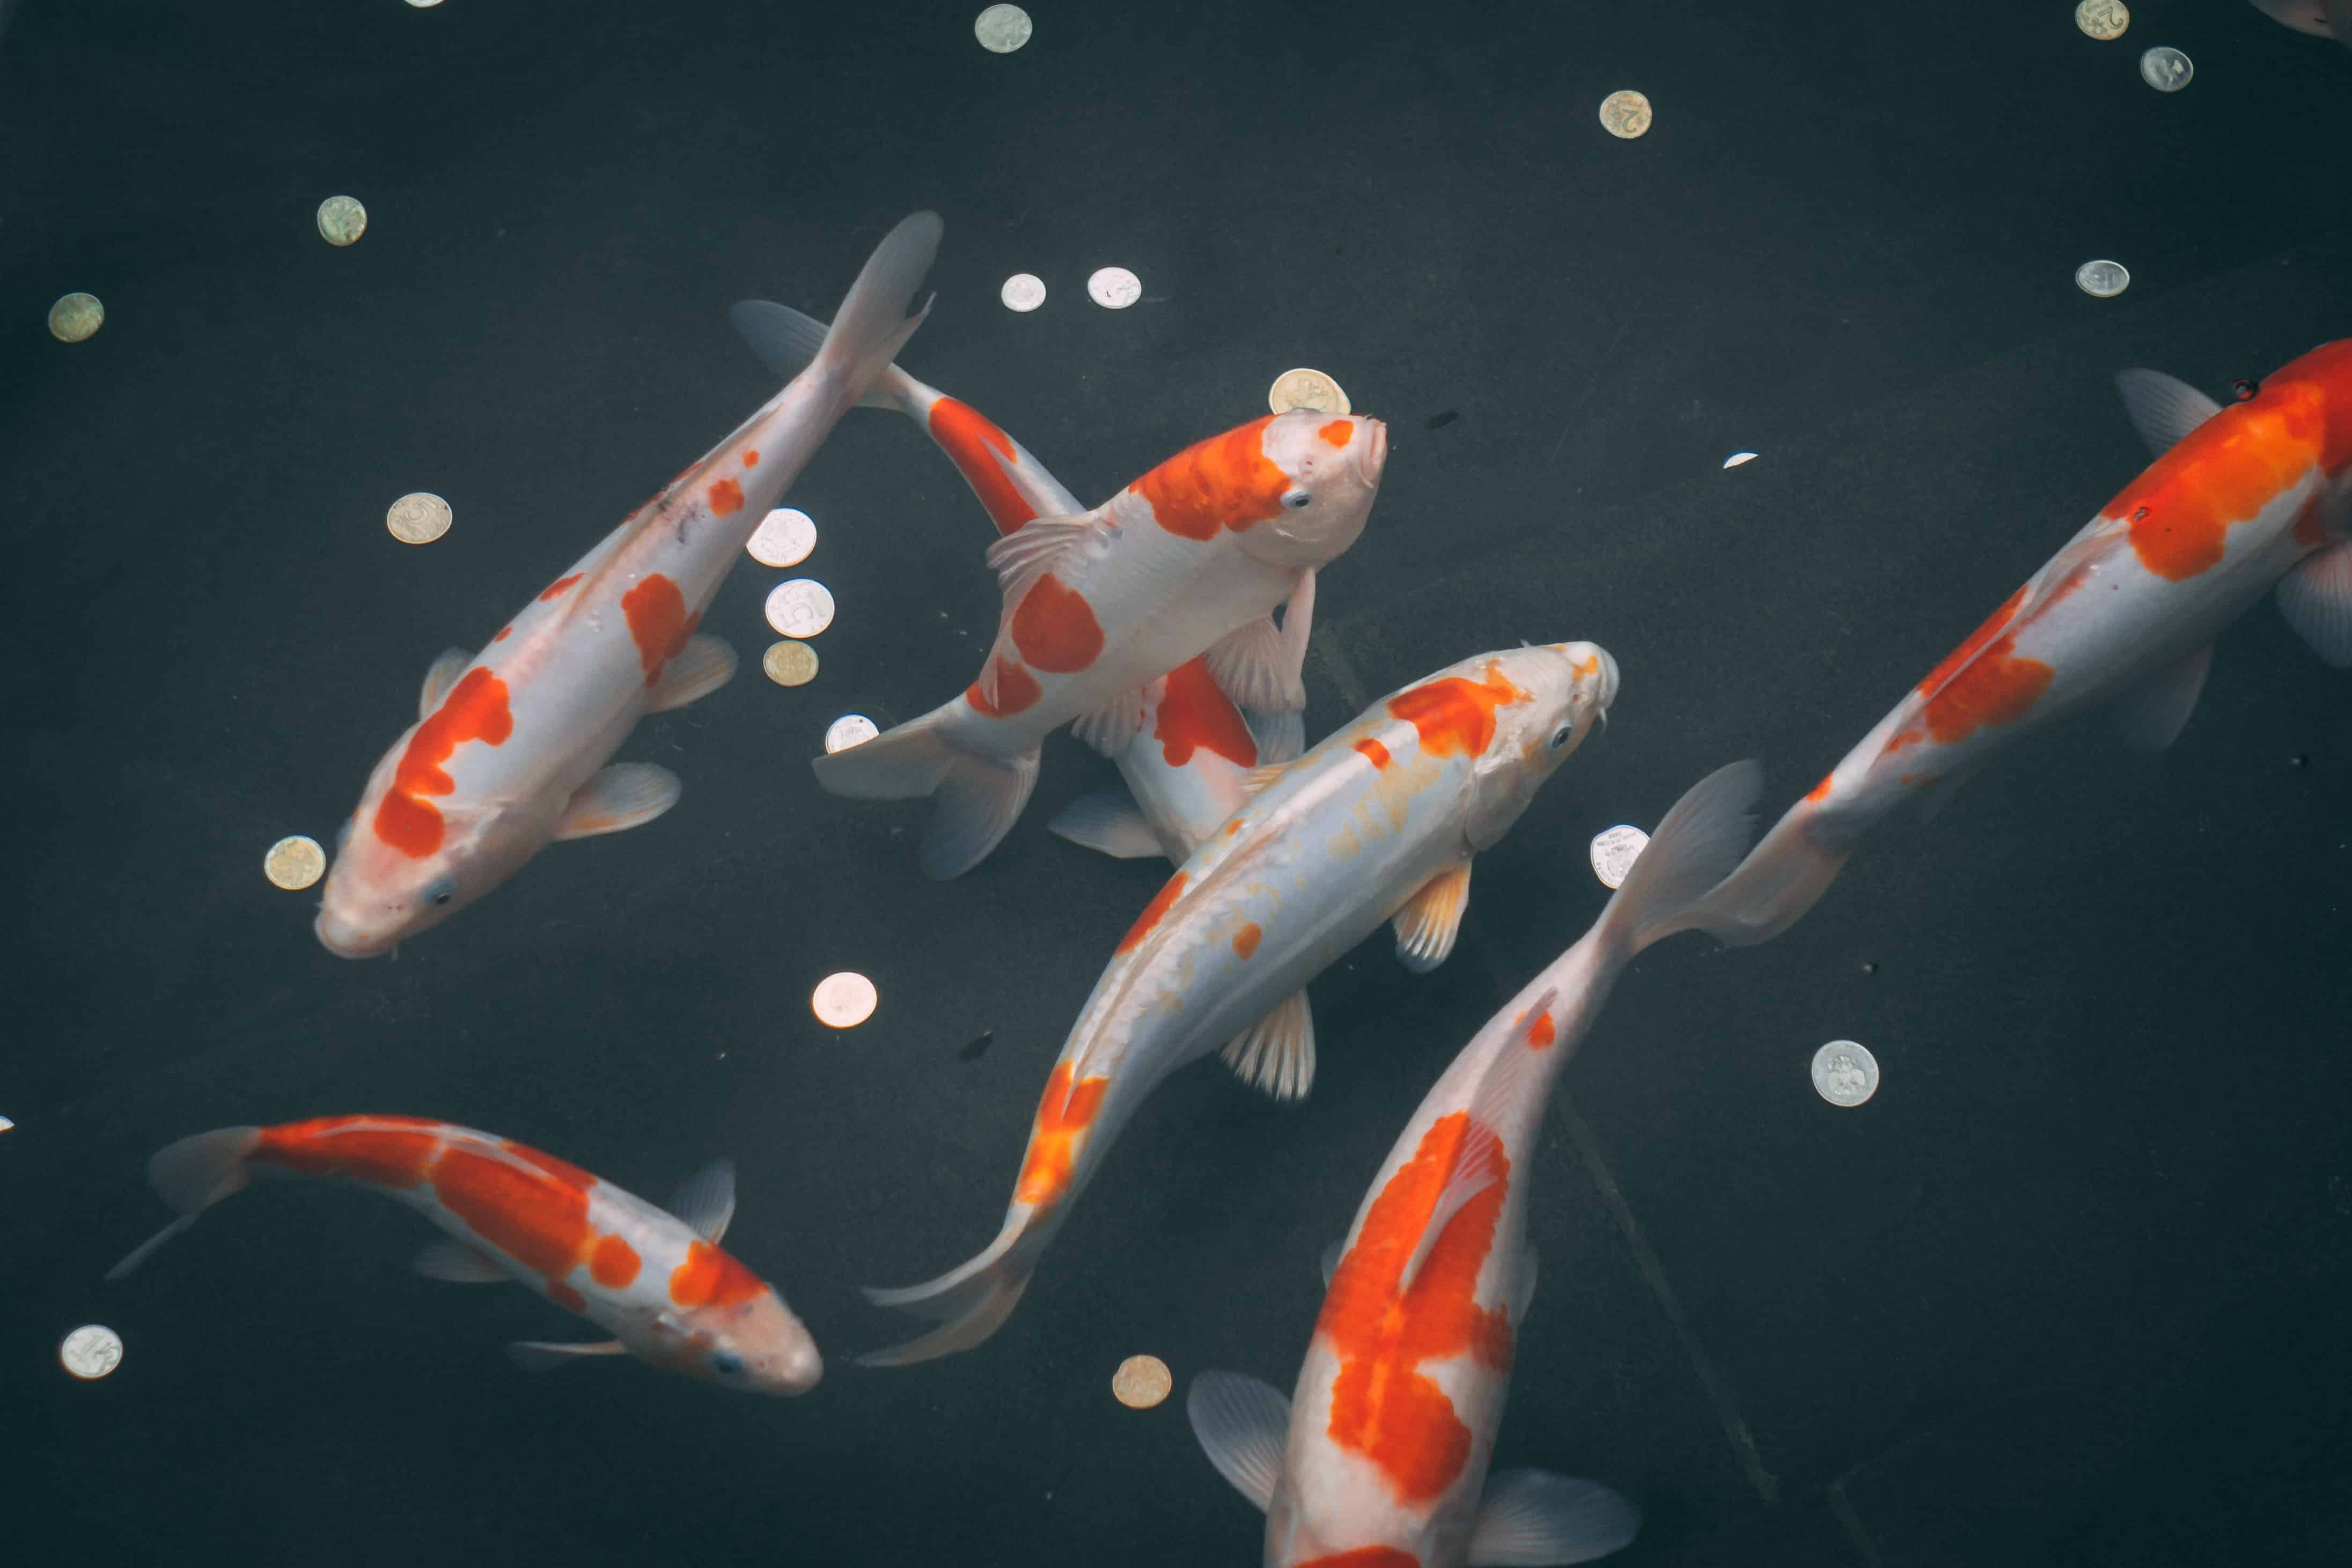 40 Koi Fish Facts You Have To Know About This Magical Carp | Facts.net